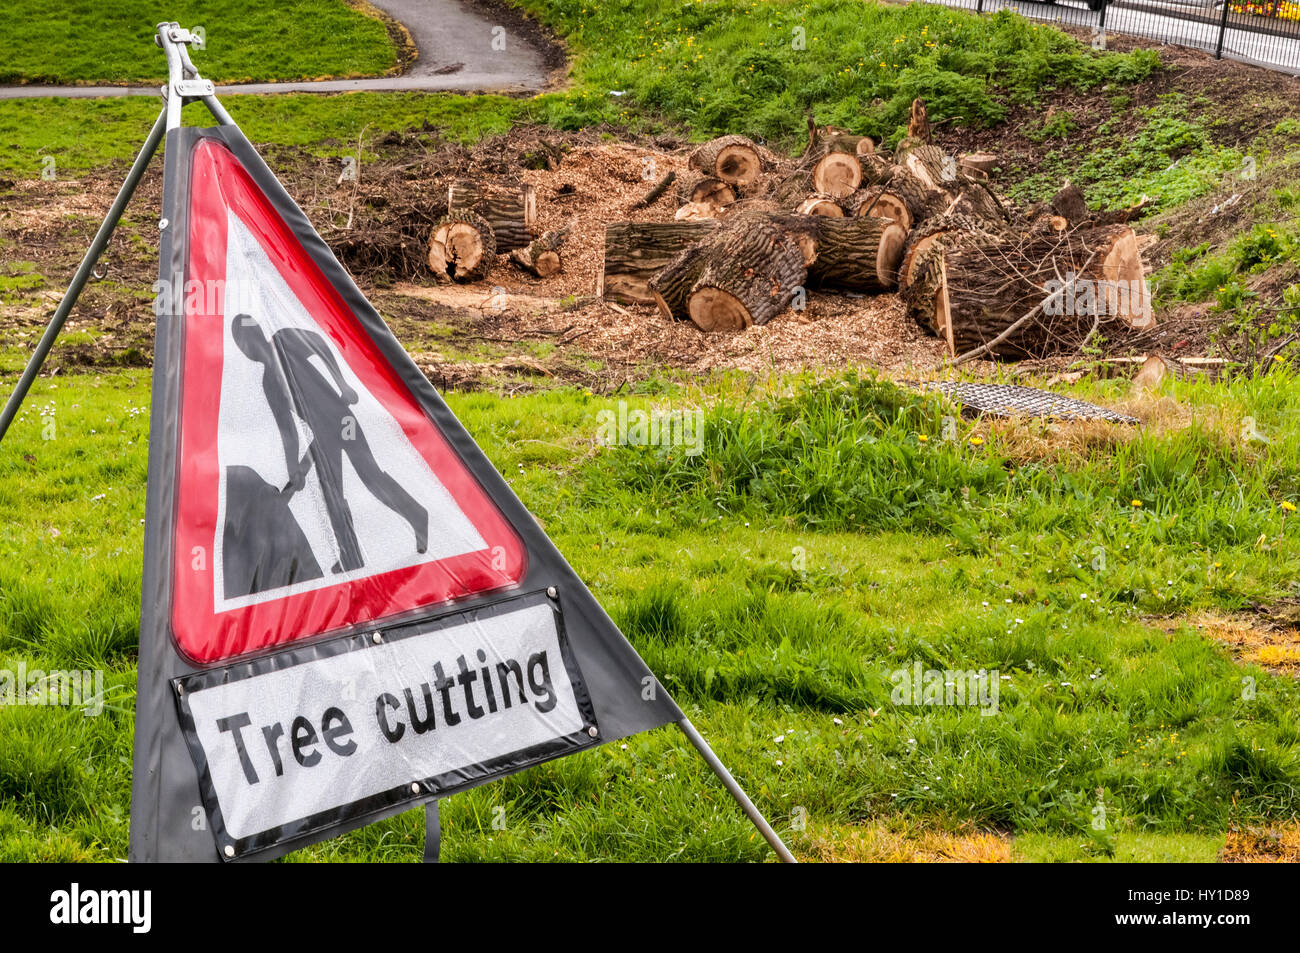 Tree felling in progress sign. Sawn tree logs in the background Stock Photo